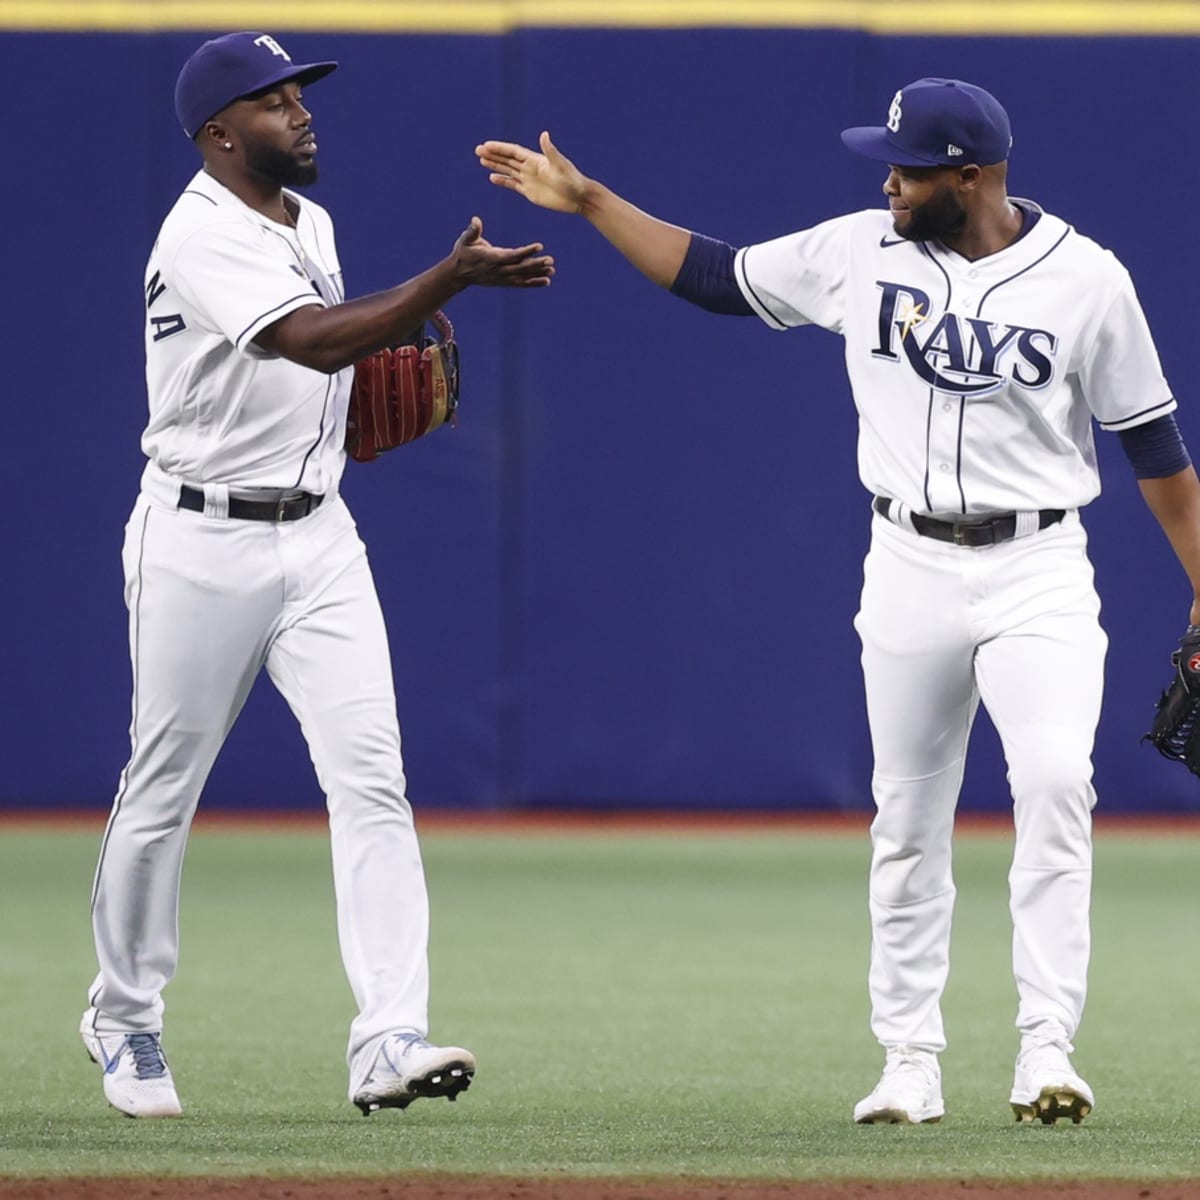 Tampa Bay Rays 2022 Major League Baseball Schedule With Dates